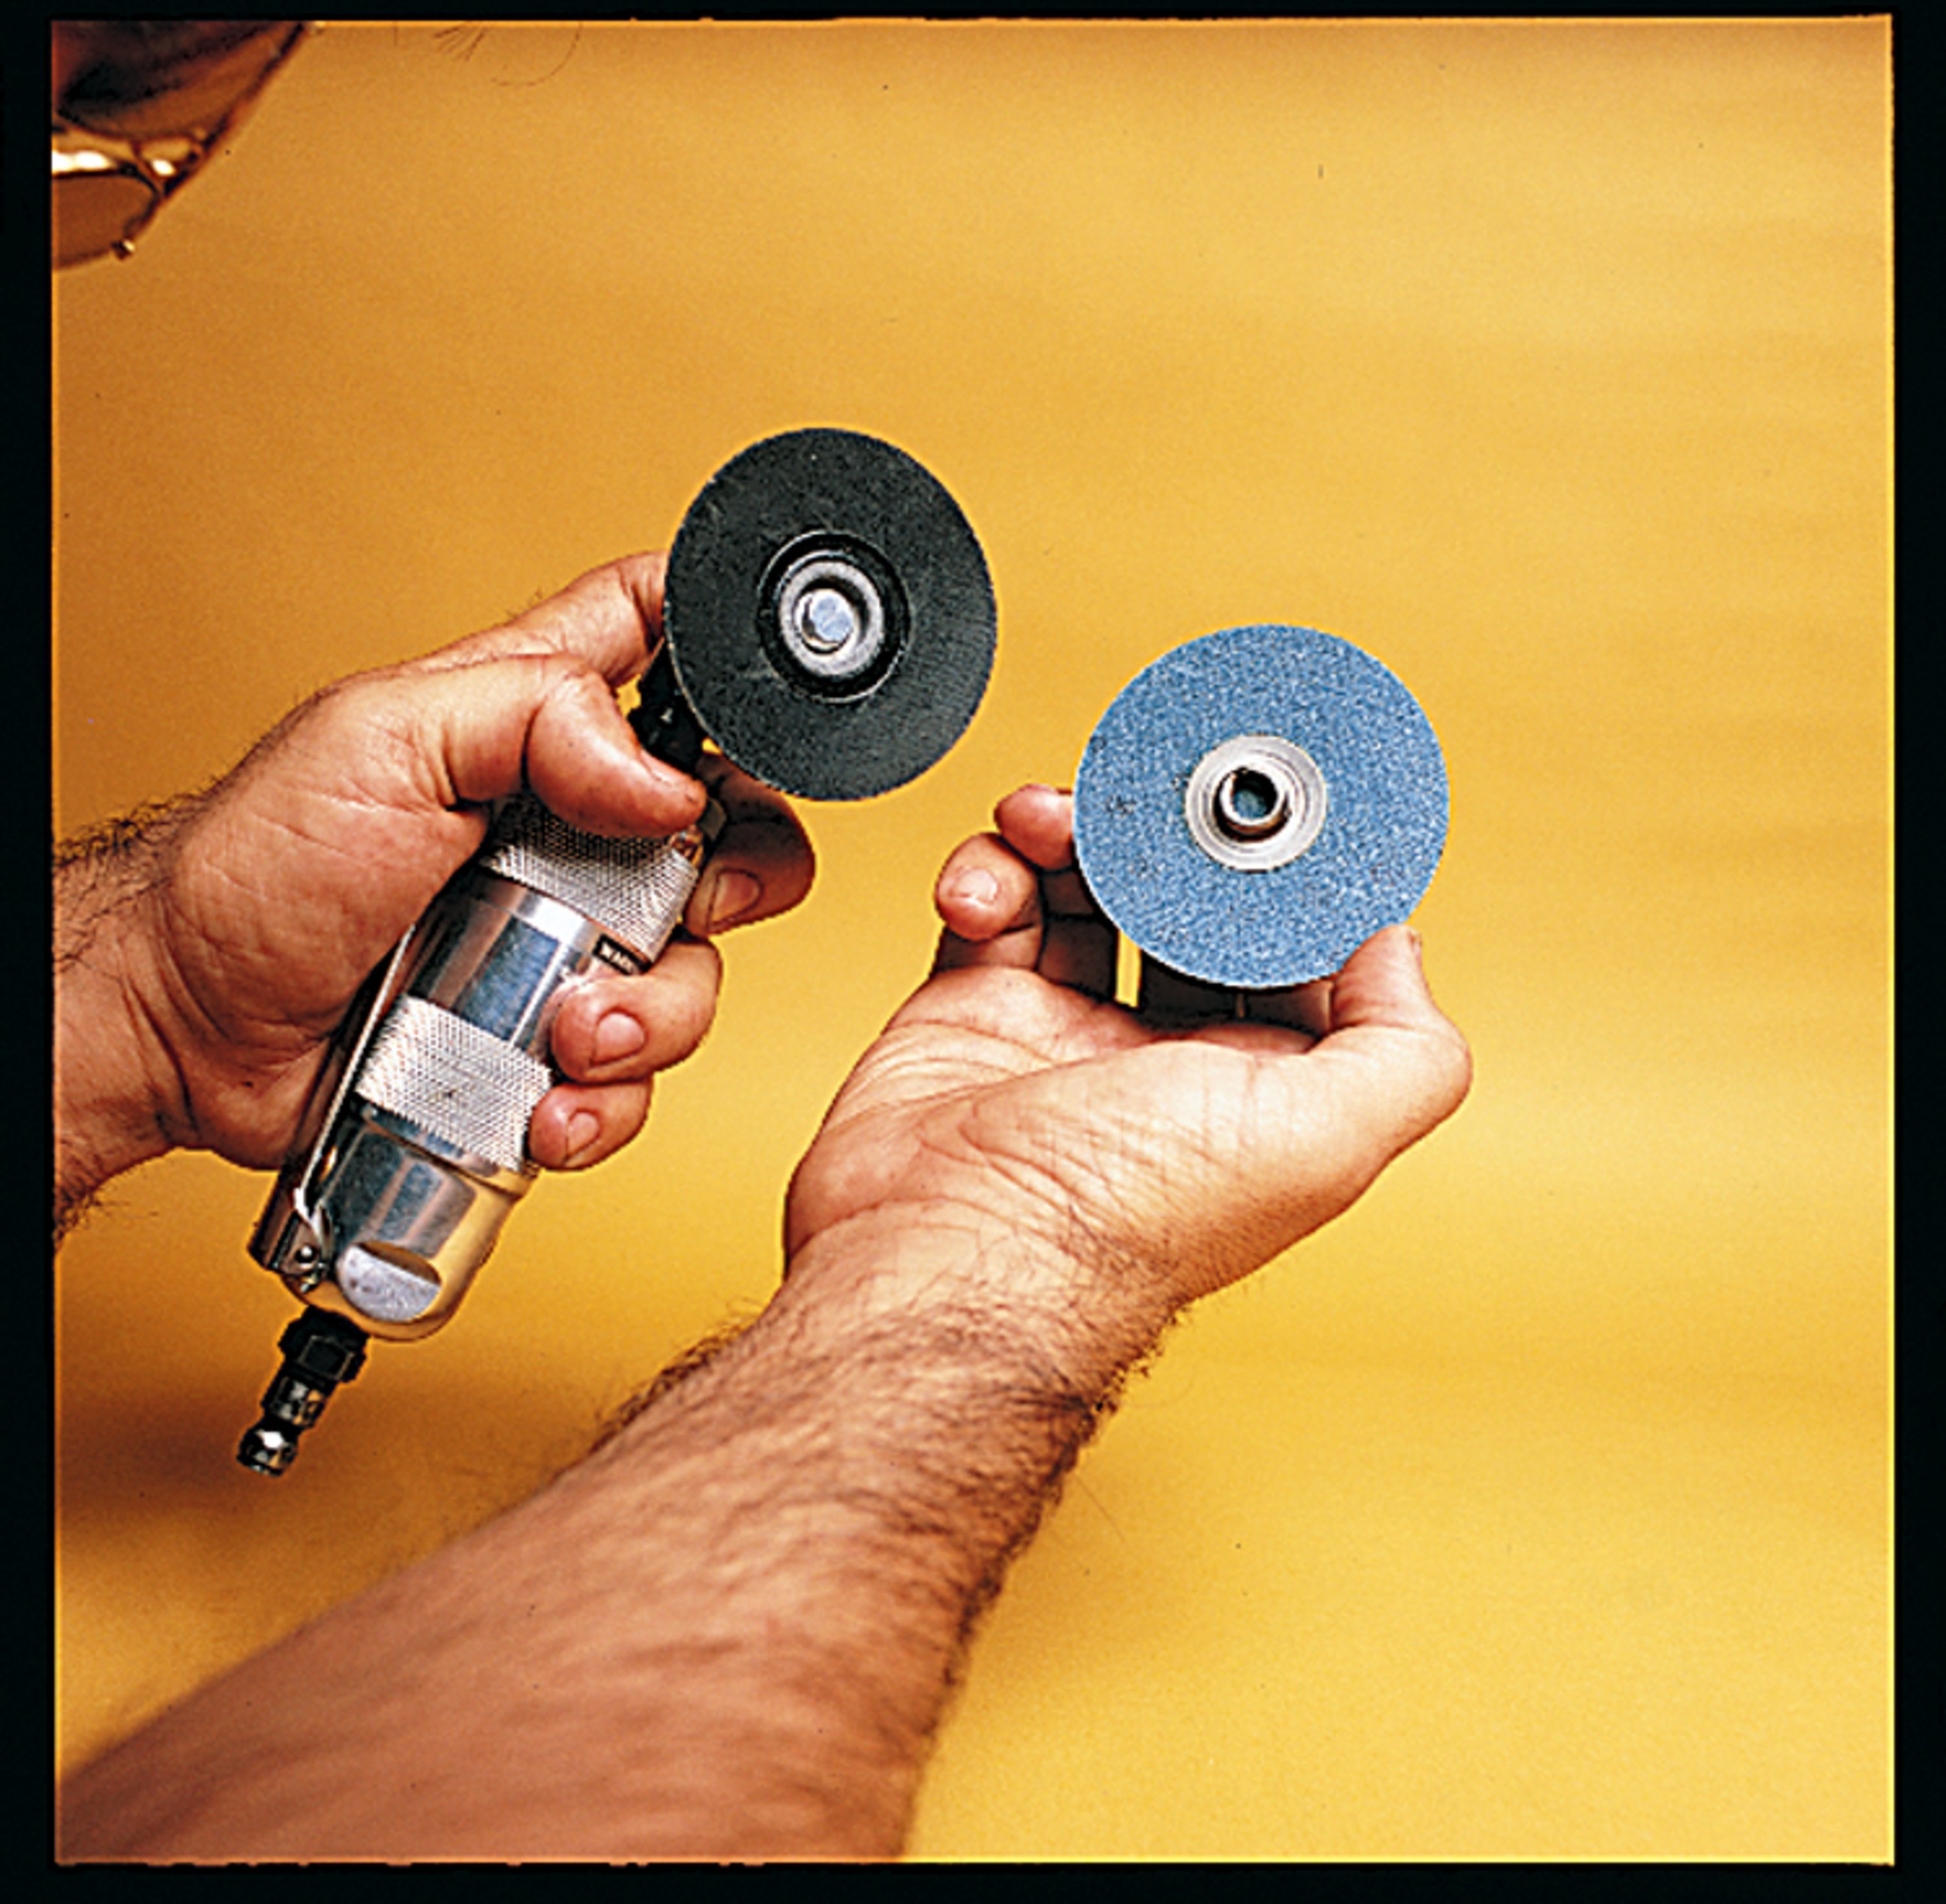 The Standard Abrasives™ Felt Polishing Disc helps seal the job by delivering a final polish. It's great for polishing a variety of metals like aluminum, stainless steel, brass and chrome.